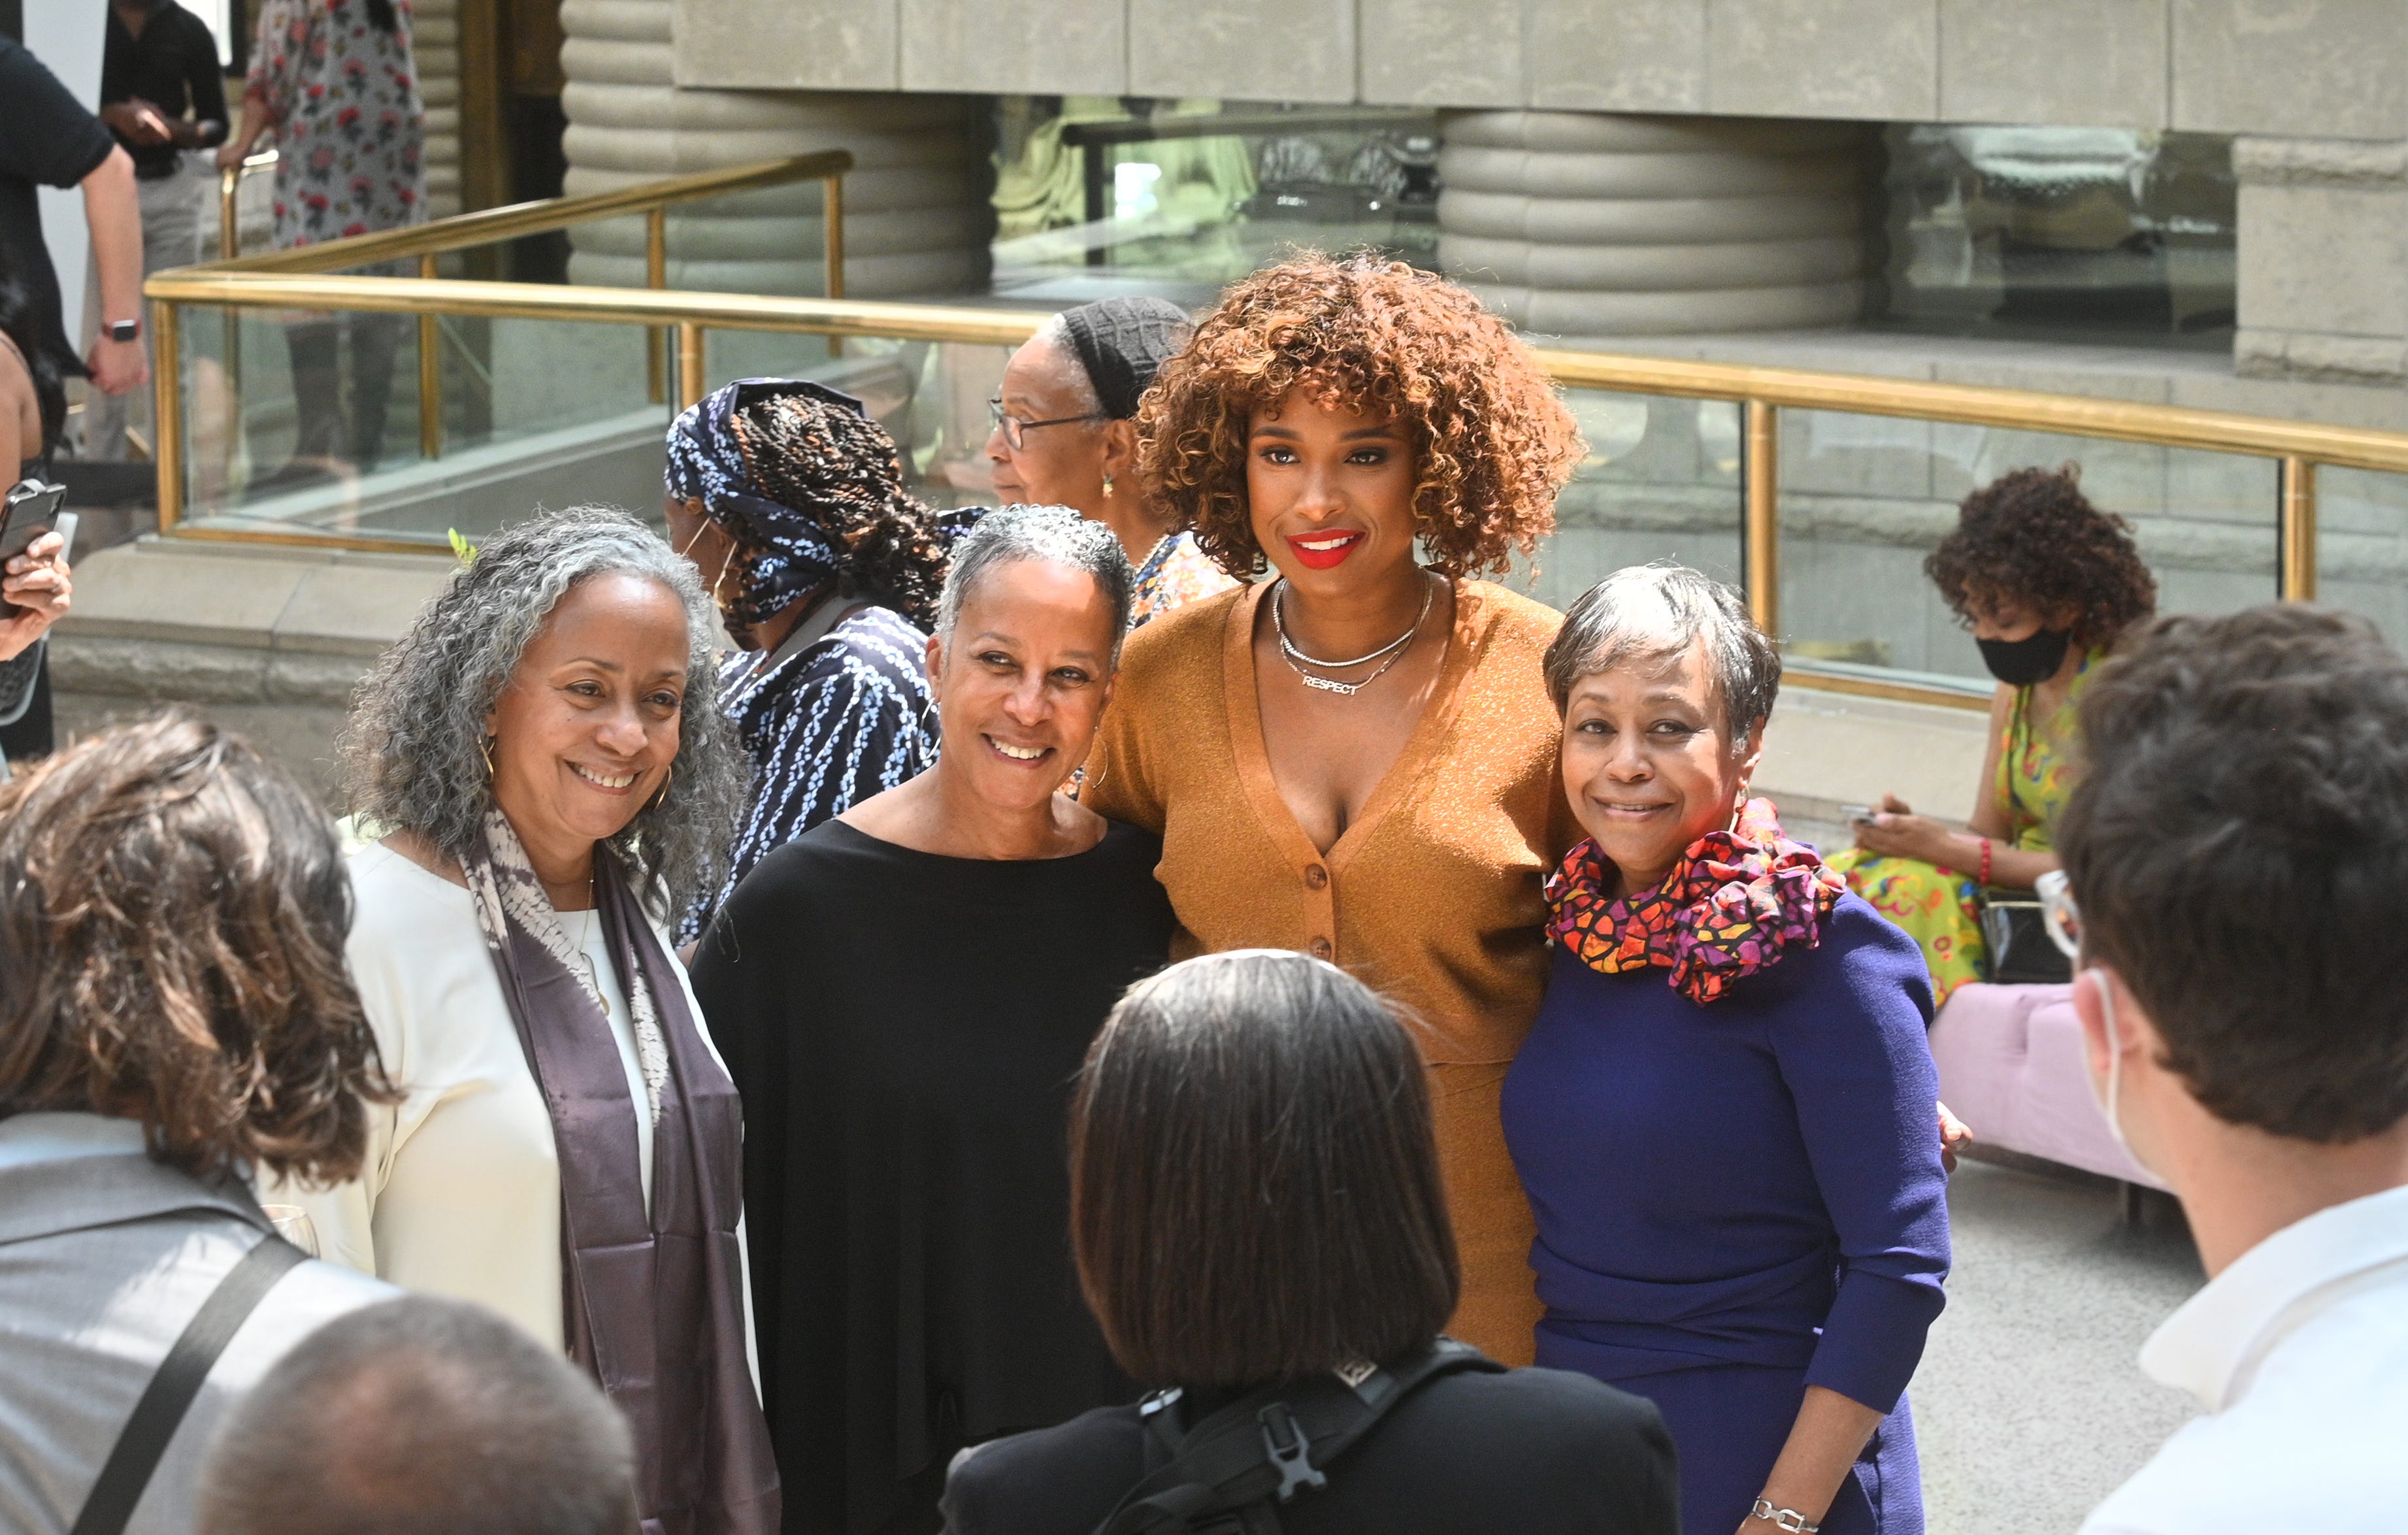 Jennifer Hudson (center) takes a photo with supporters inside the Charles Wright Museum in Detroit .